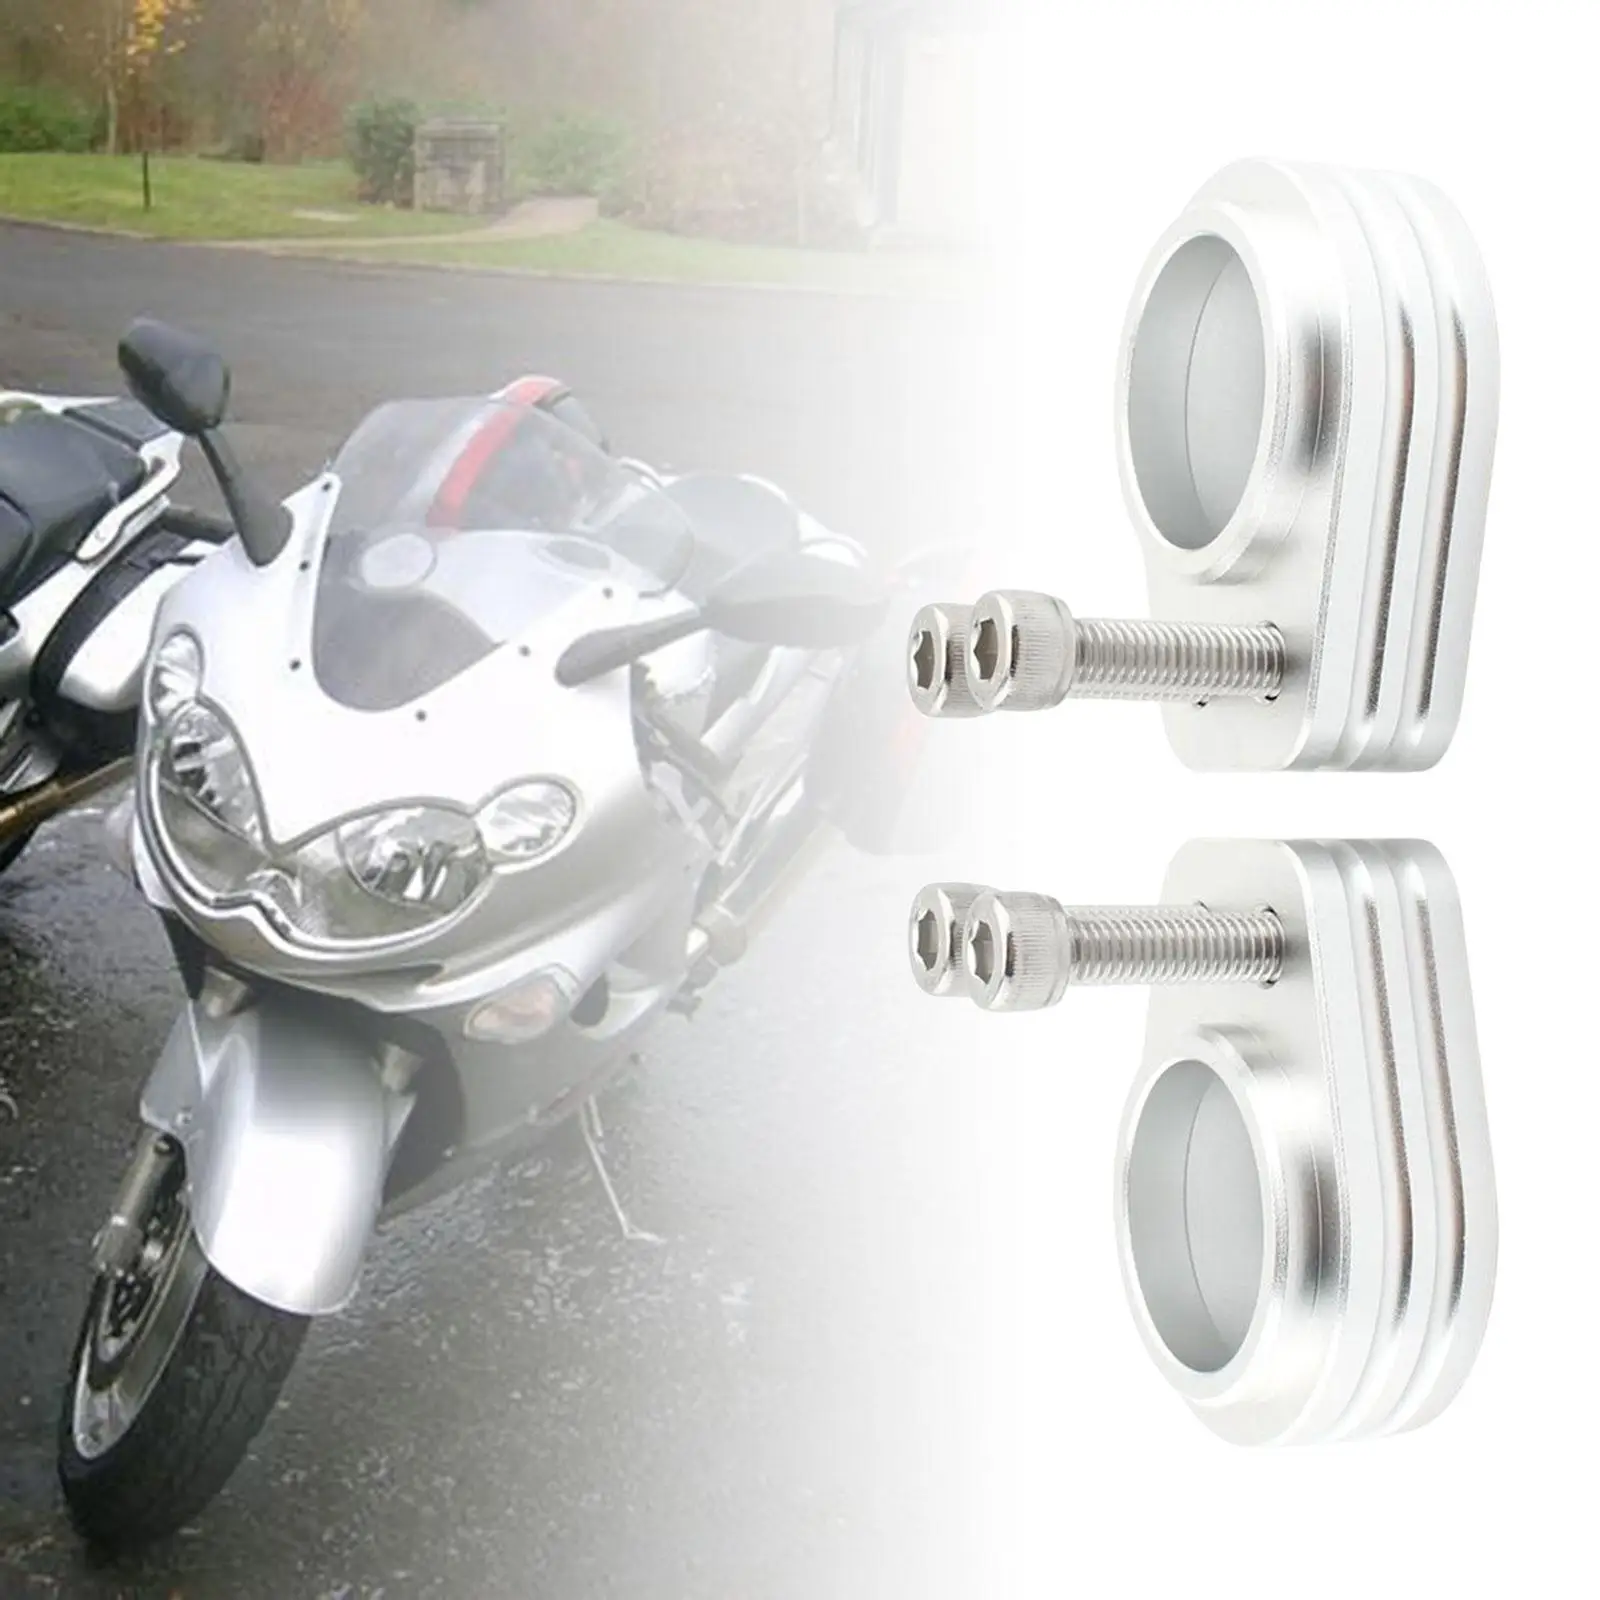 Motorcycle Mount Riser Clamp 0.8inch Sturdy with Screws Aluminum Alloy for Zzr1200 Fashionable Motorbike Spare Parts